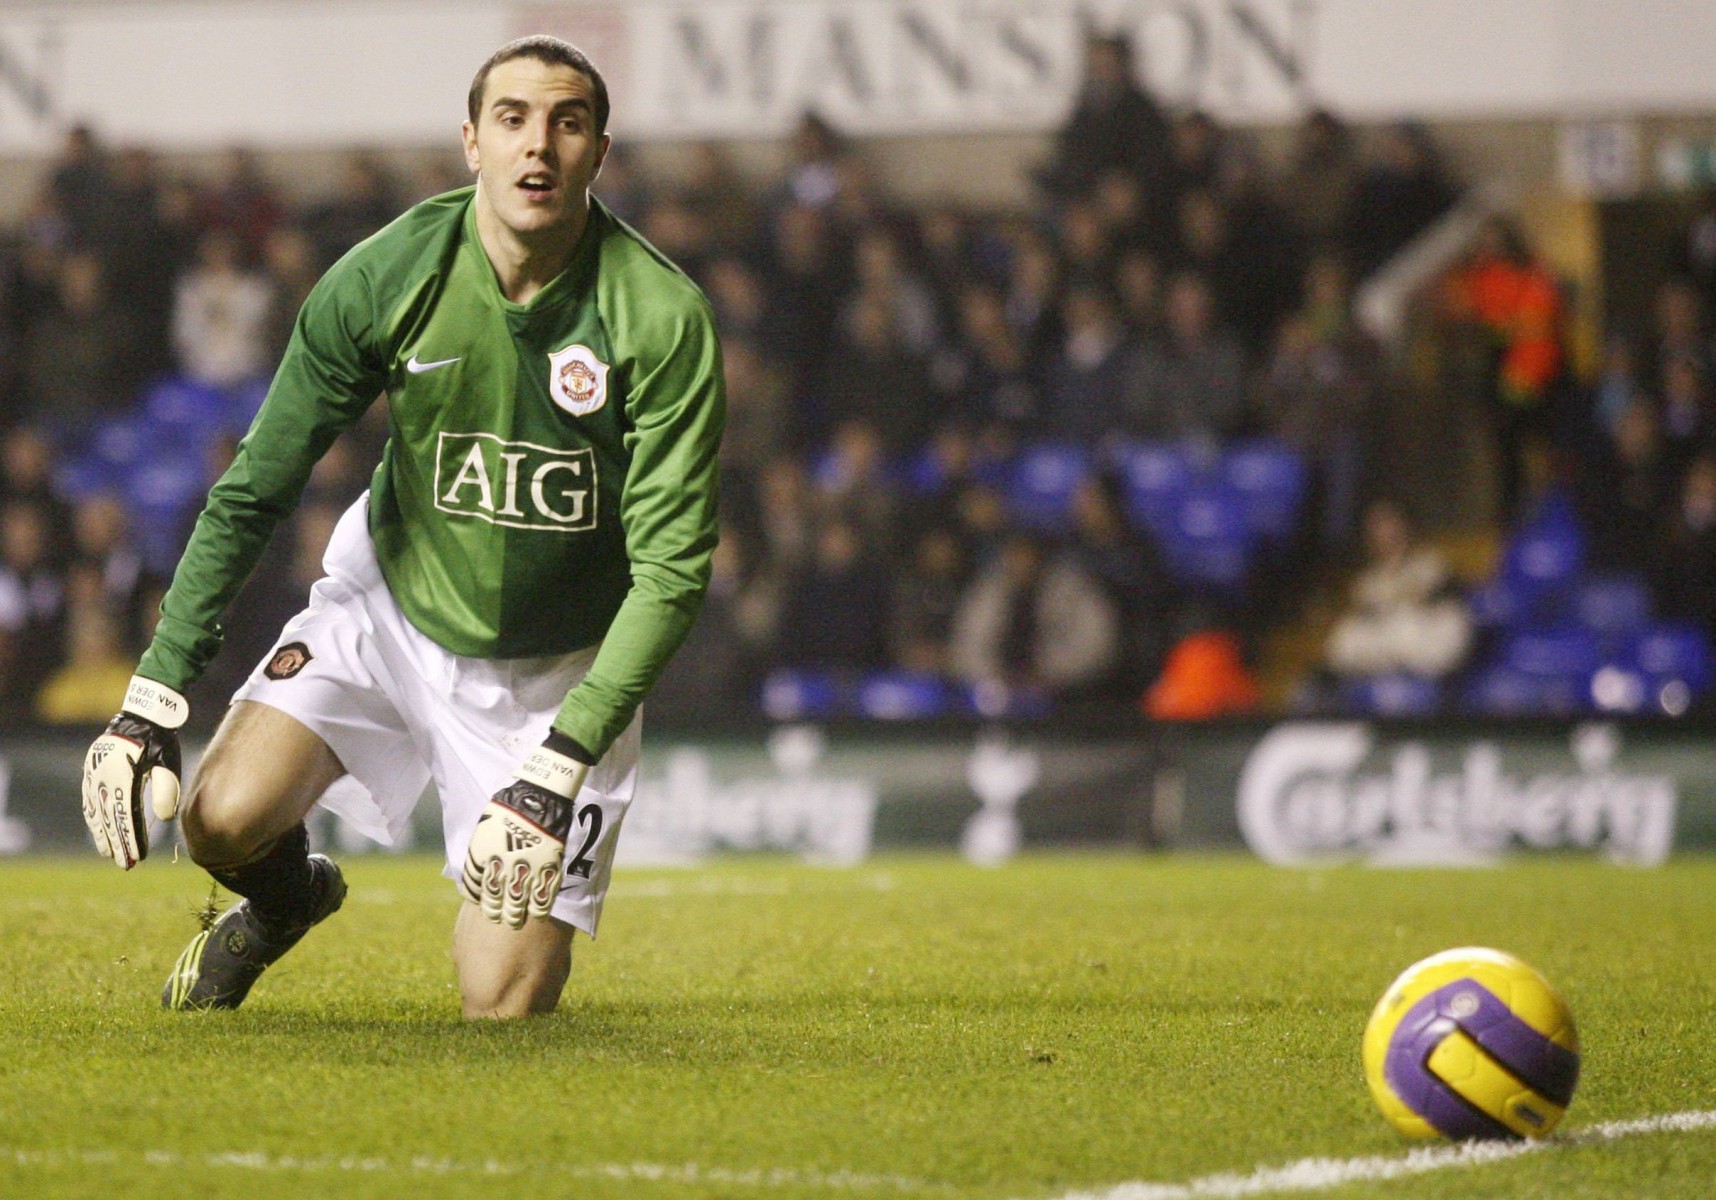 John OShea had to play the remainder of the Man Utd v Spurs game in goal